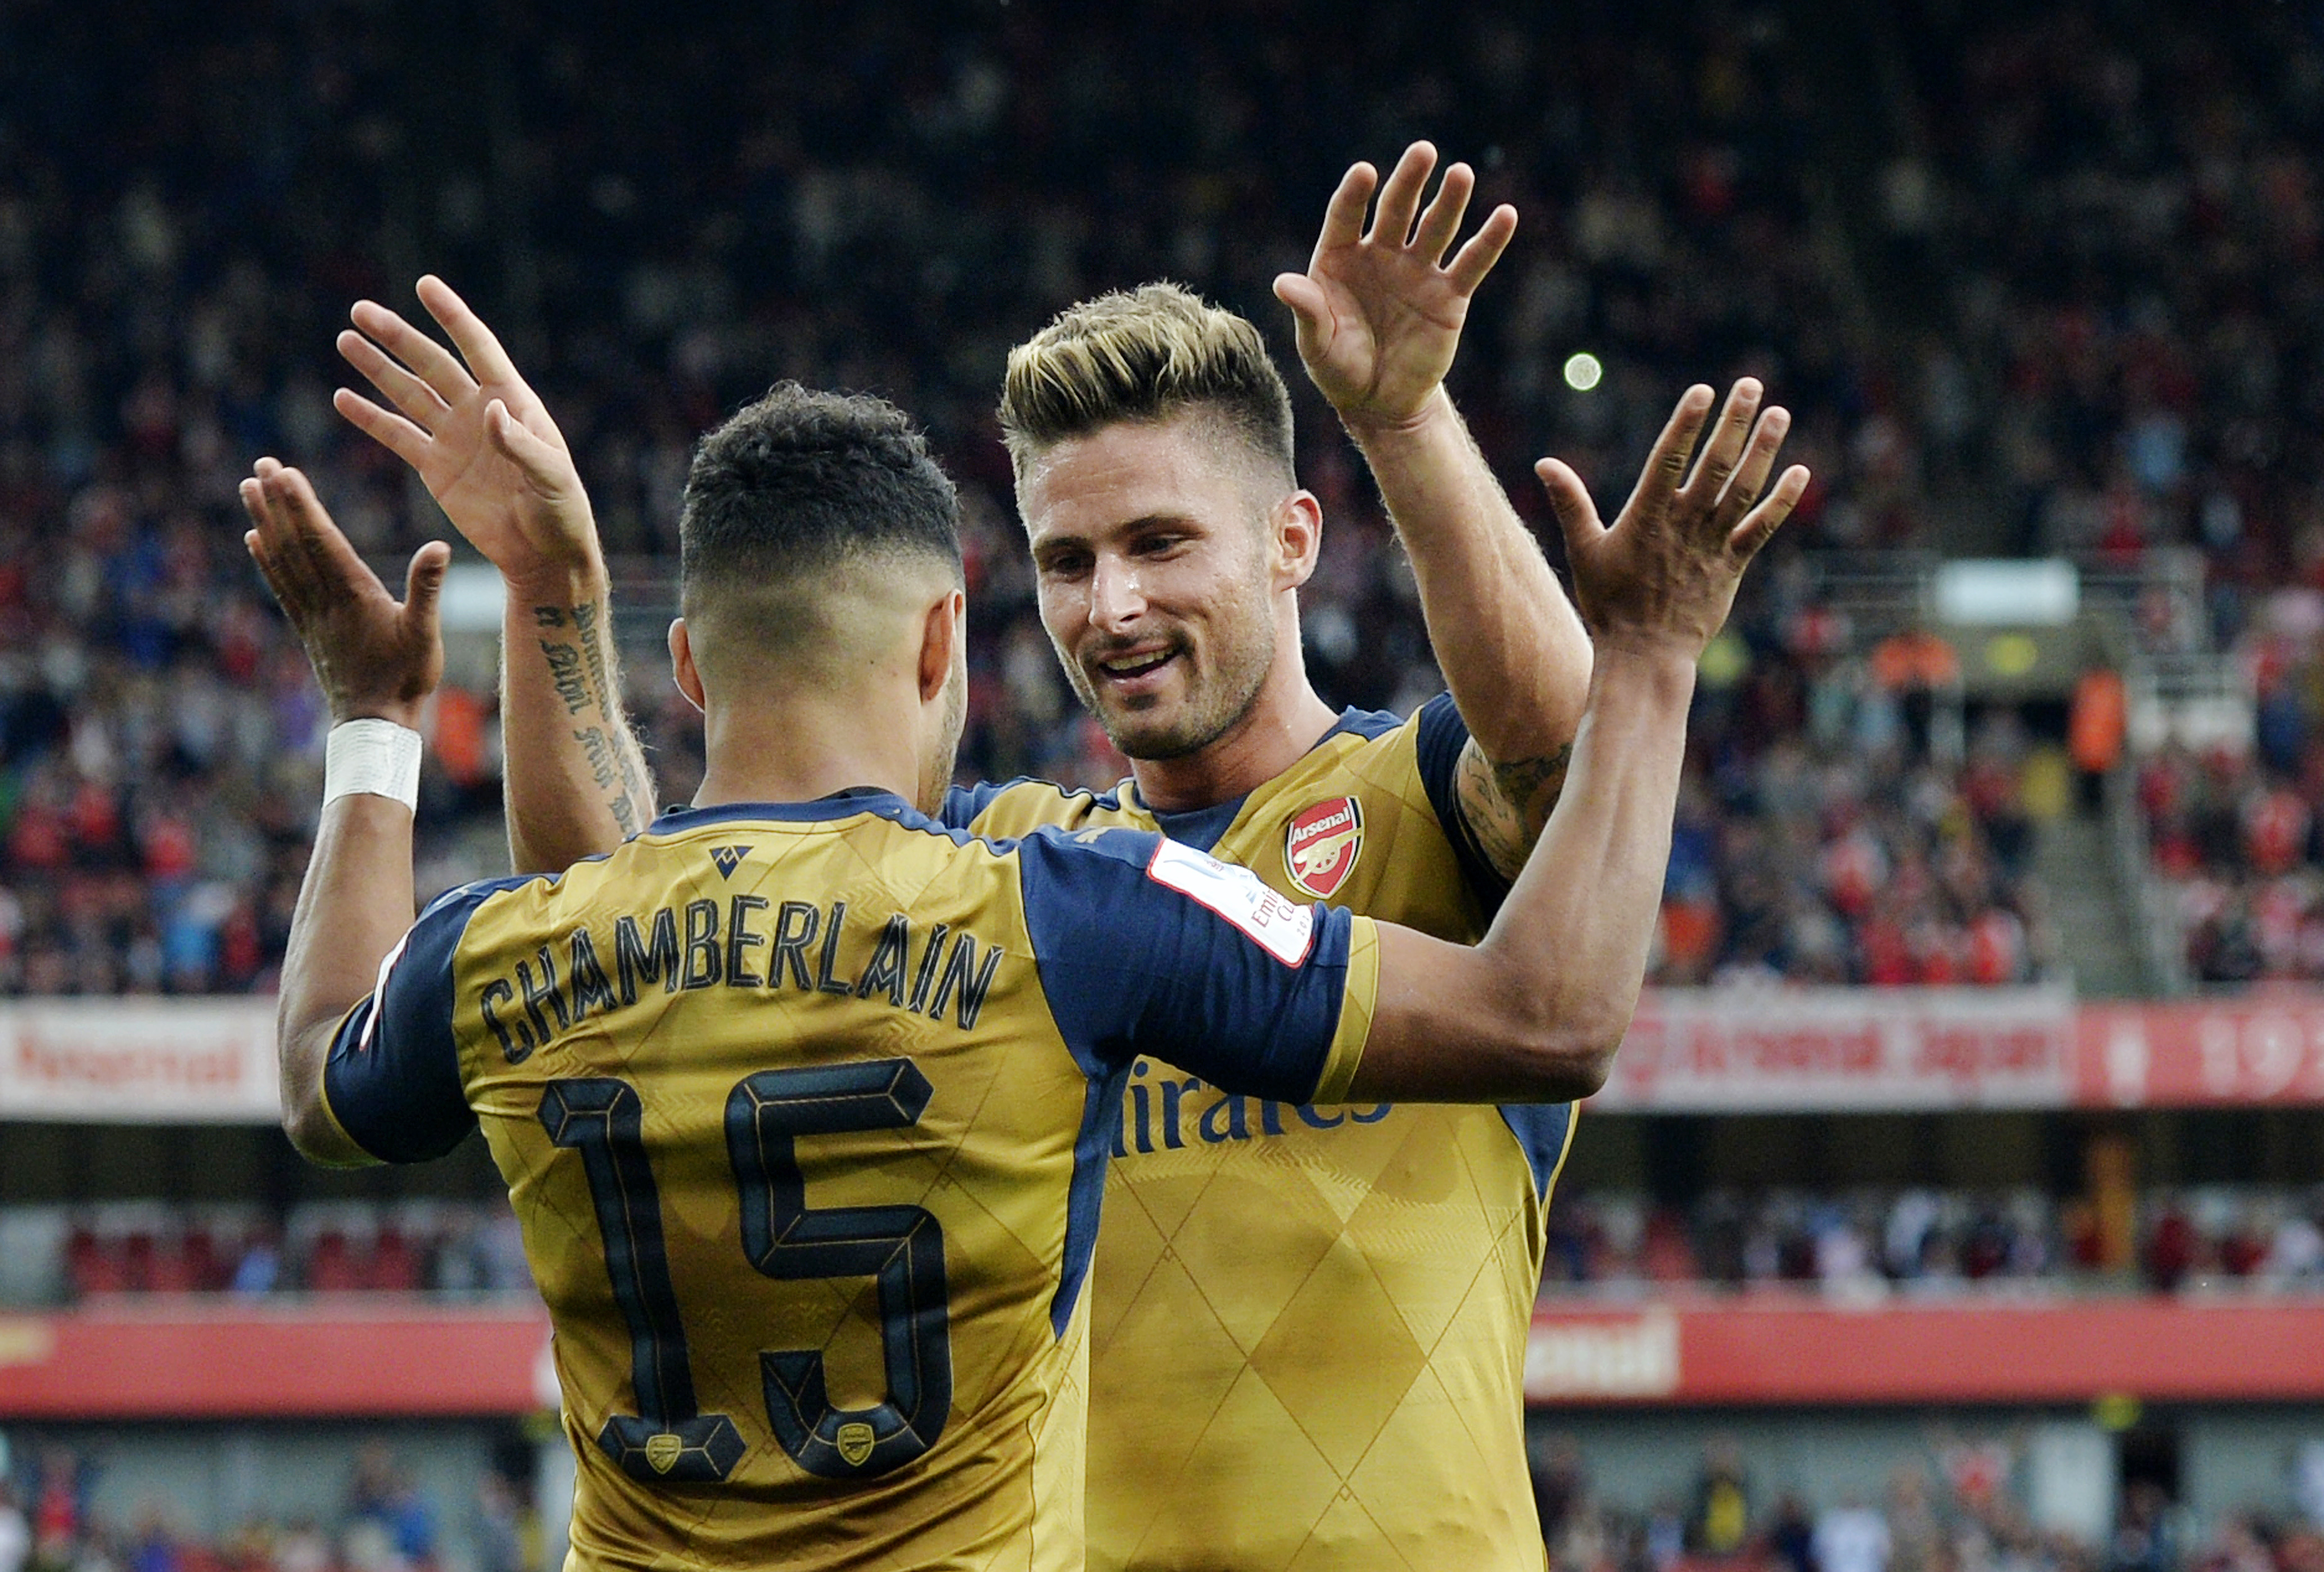 epa04860302 Arsenal's Alex Oxlade-Chamberlain (L) celebrates with team mate Oliver Giroud after scoring during an Emirates Cup soccer match between Arsenal and Olympique Lyonnais at the Emirates Stadium in London, Britain, 25 July 2015.  EPA/ANDY RAIN